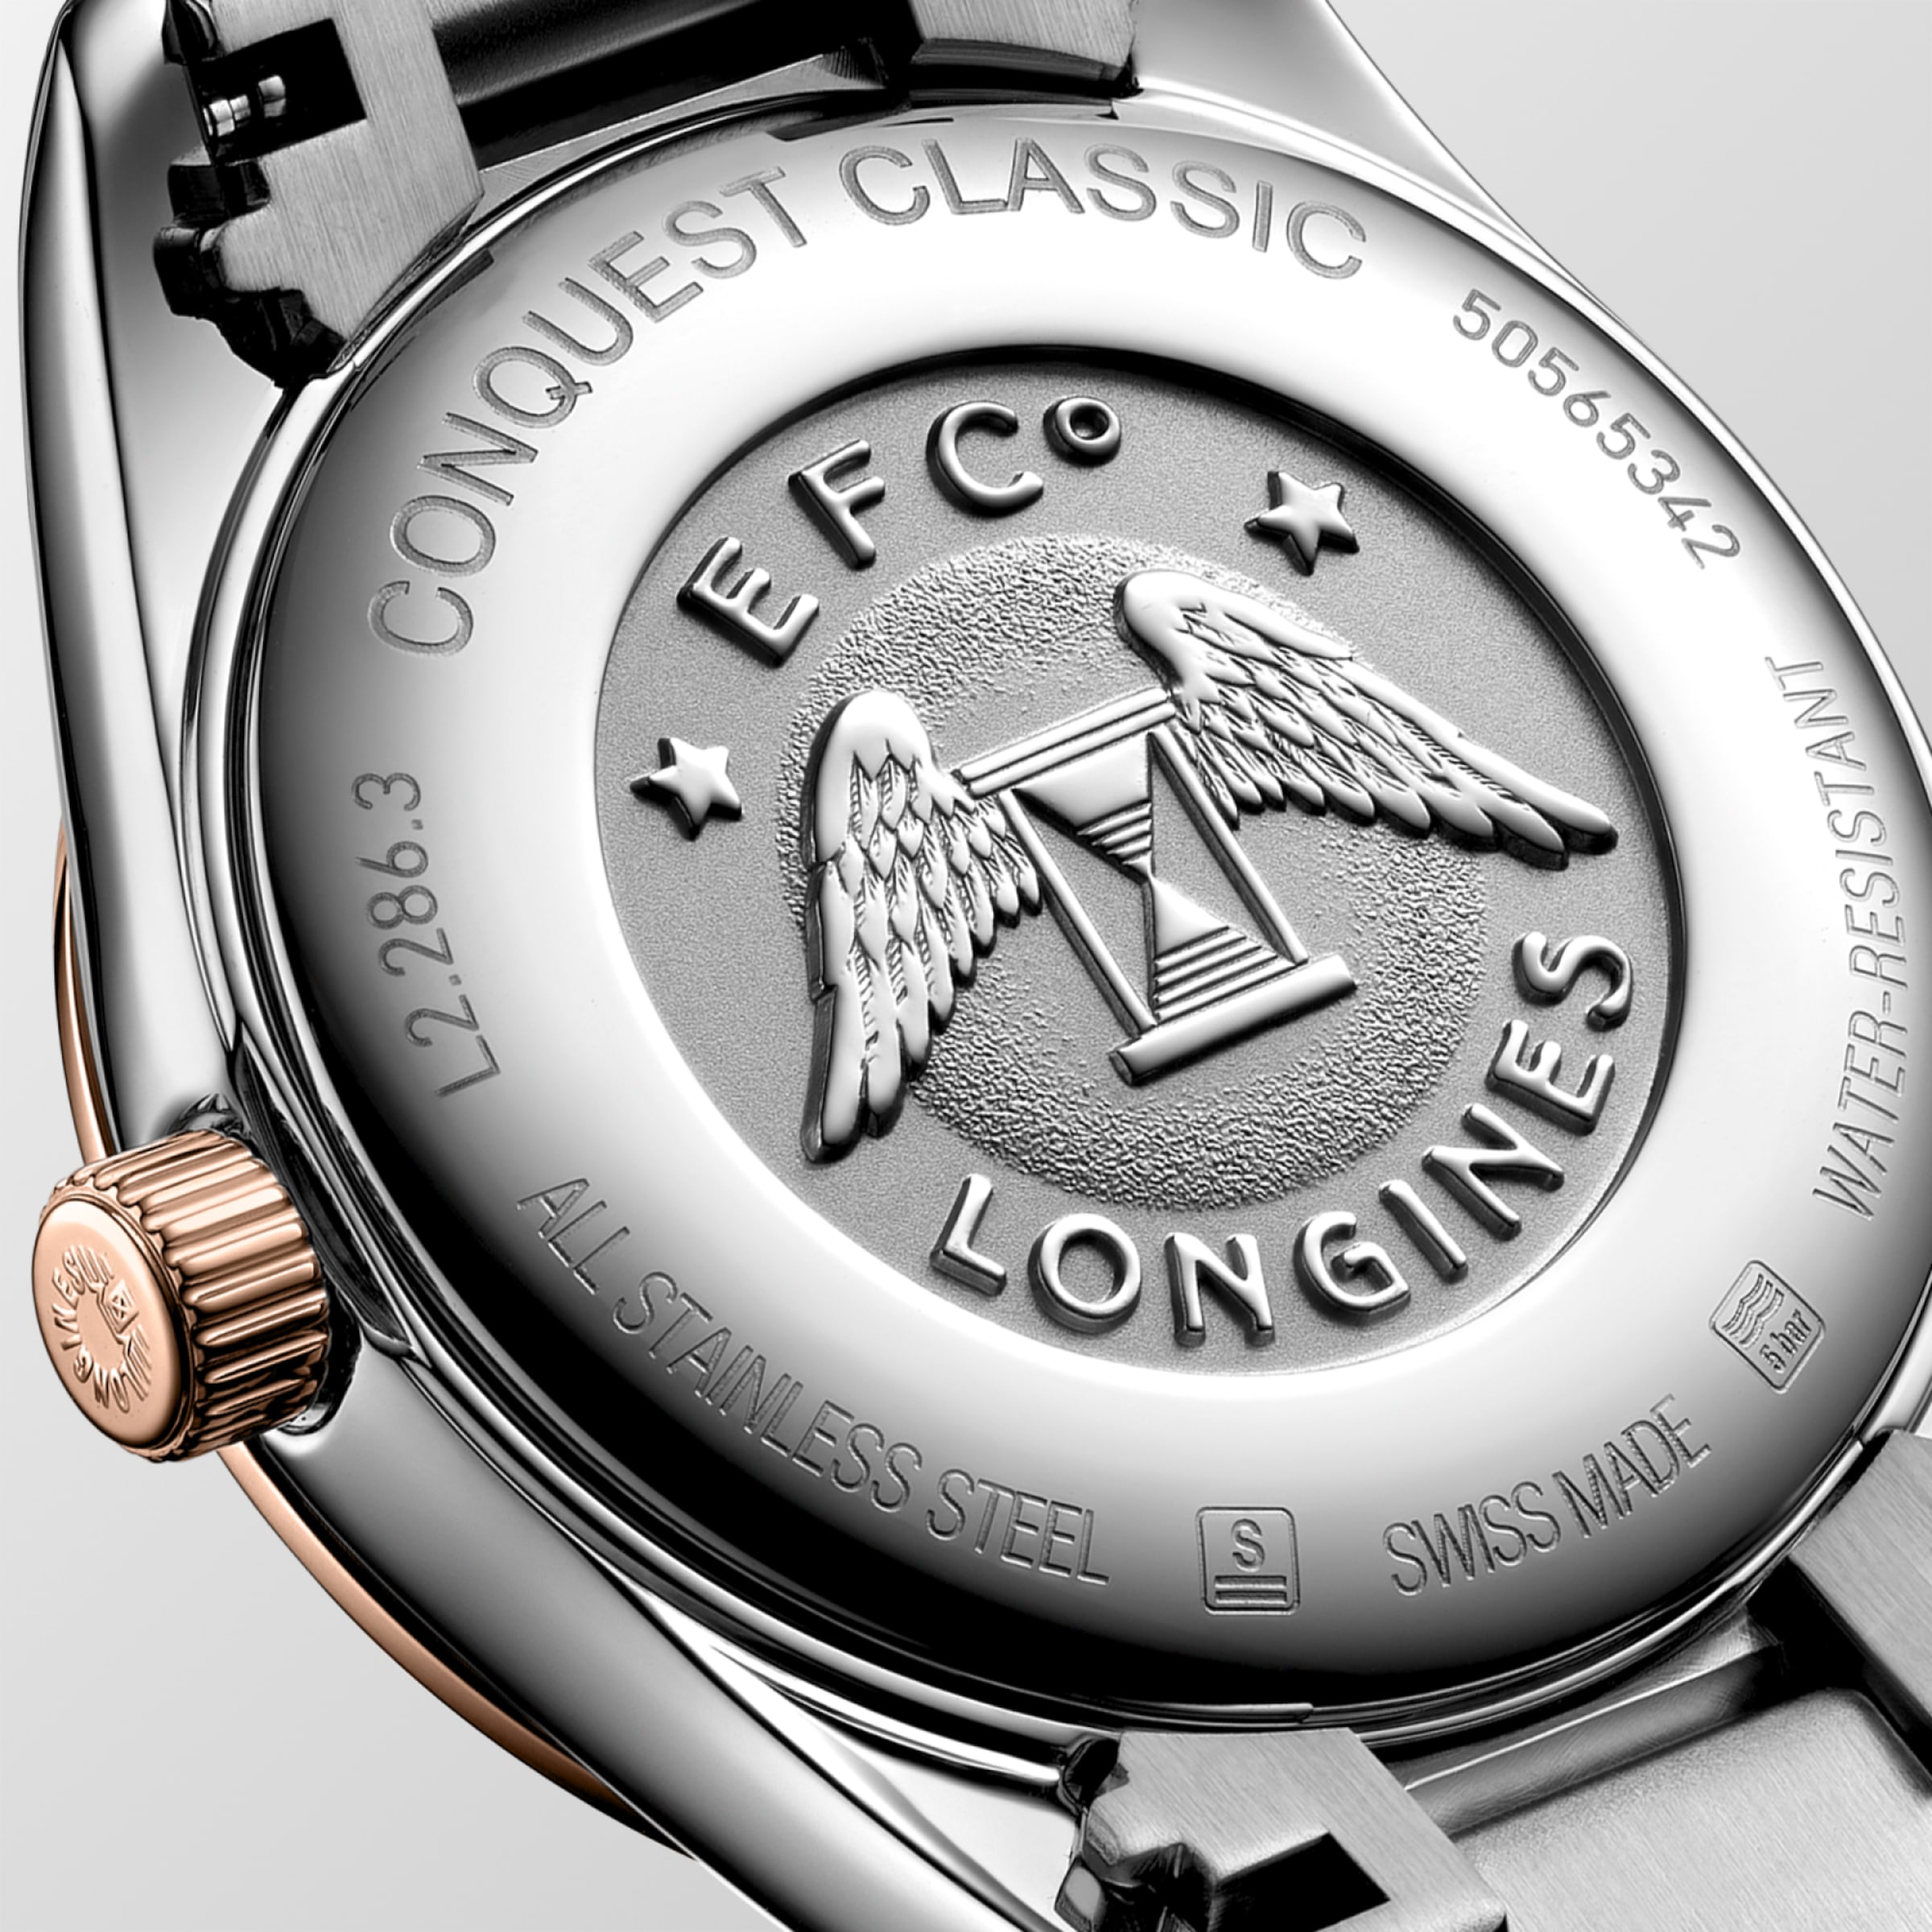 Longines CONQUEST CLASSIC Quartz Stainless steel and red PVD coating Watch - L2.286.3.87.7